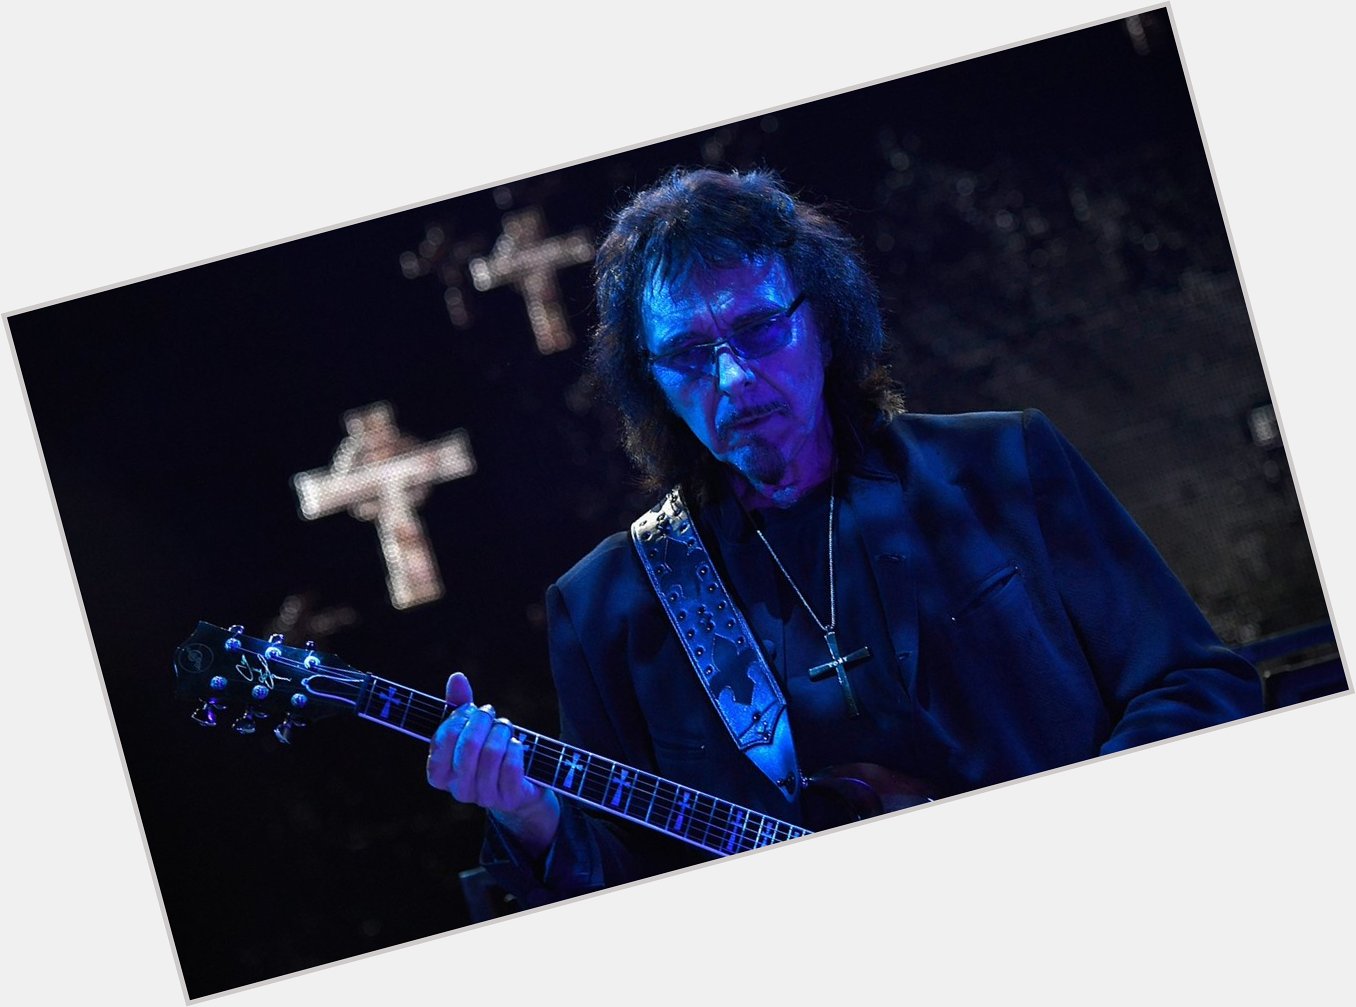 Happy birthday to the Godfather of Metal himself, Tony Iommi! What\s your favorite Black Sabbath song? 